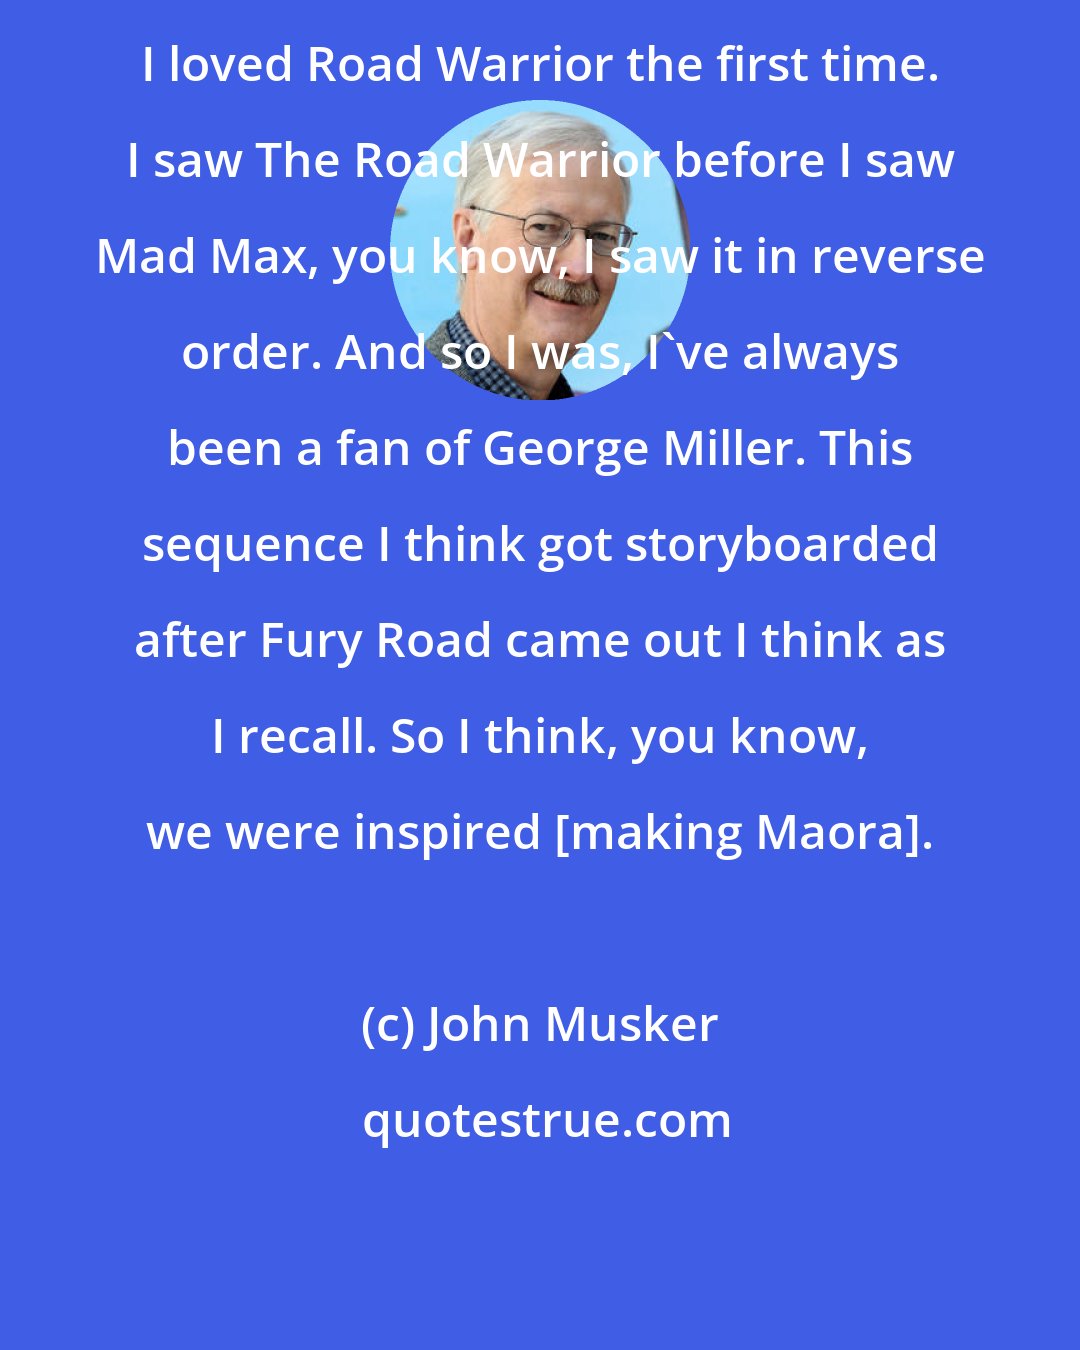 John Musker: I loved Road Warrior the first time. I saw The Road Warrior before I saw Mad Max, you know, I saw it in reverse order. And so I was, I've always been a fan of George Miller. This sequence I think got storyboarded after Fury Road came out I think as I recall. So I think, you know, we were inspired [making Maora].